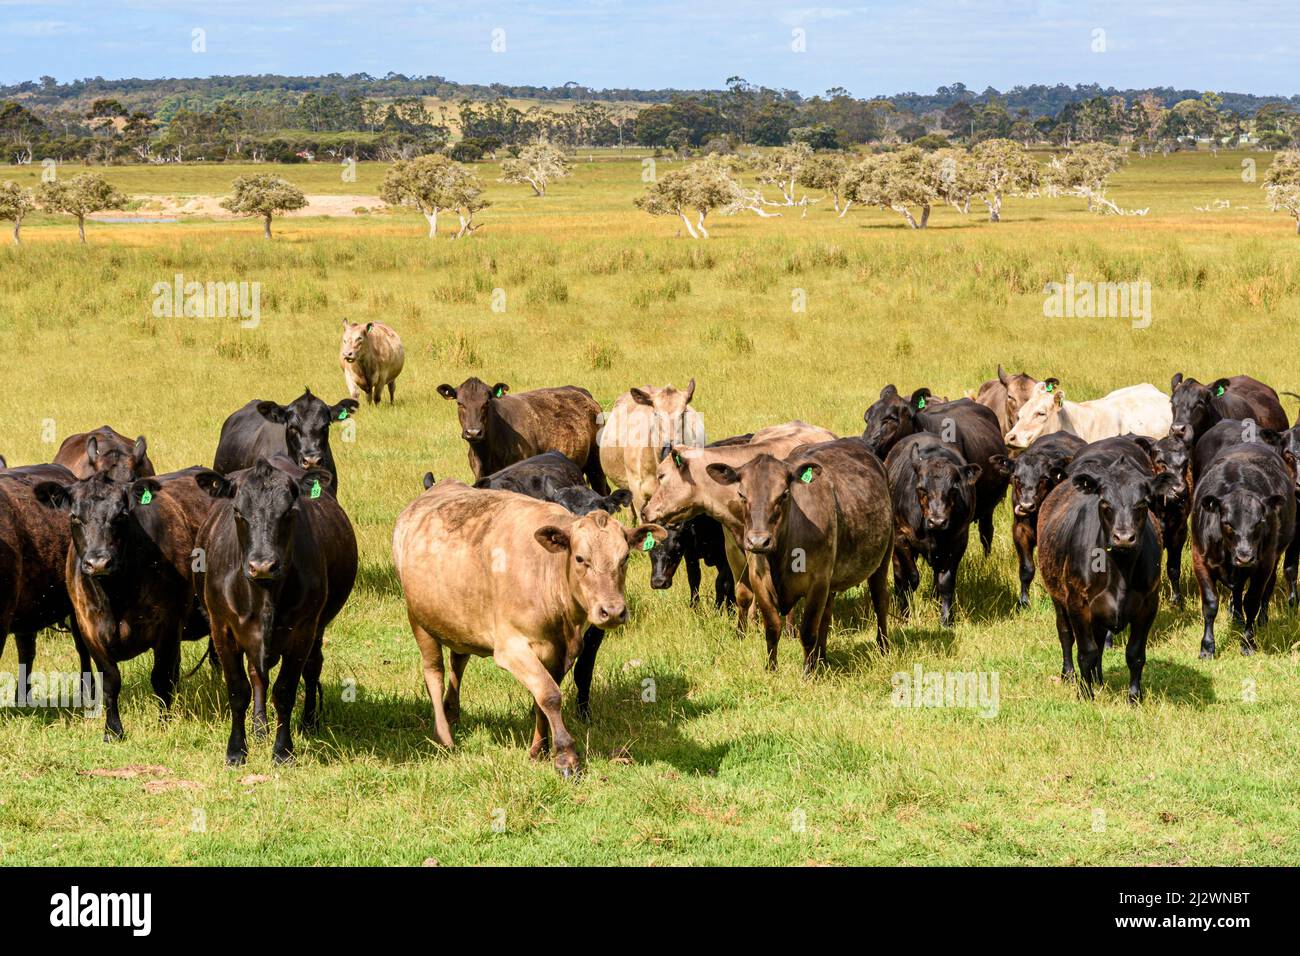 Herd of cows at  a cattle farm, Kronkup, Albany, Western Australia Stock Photo